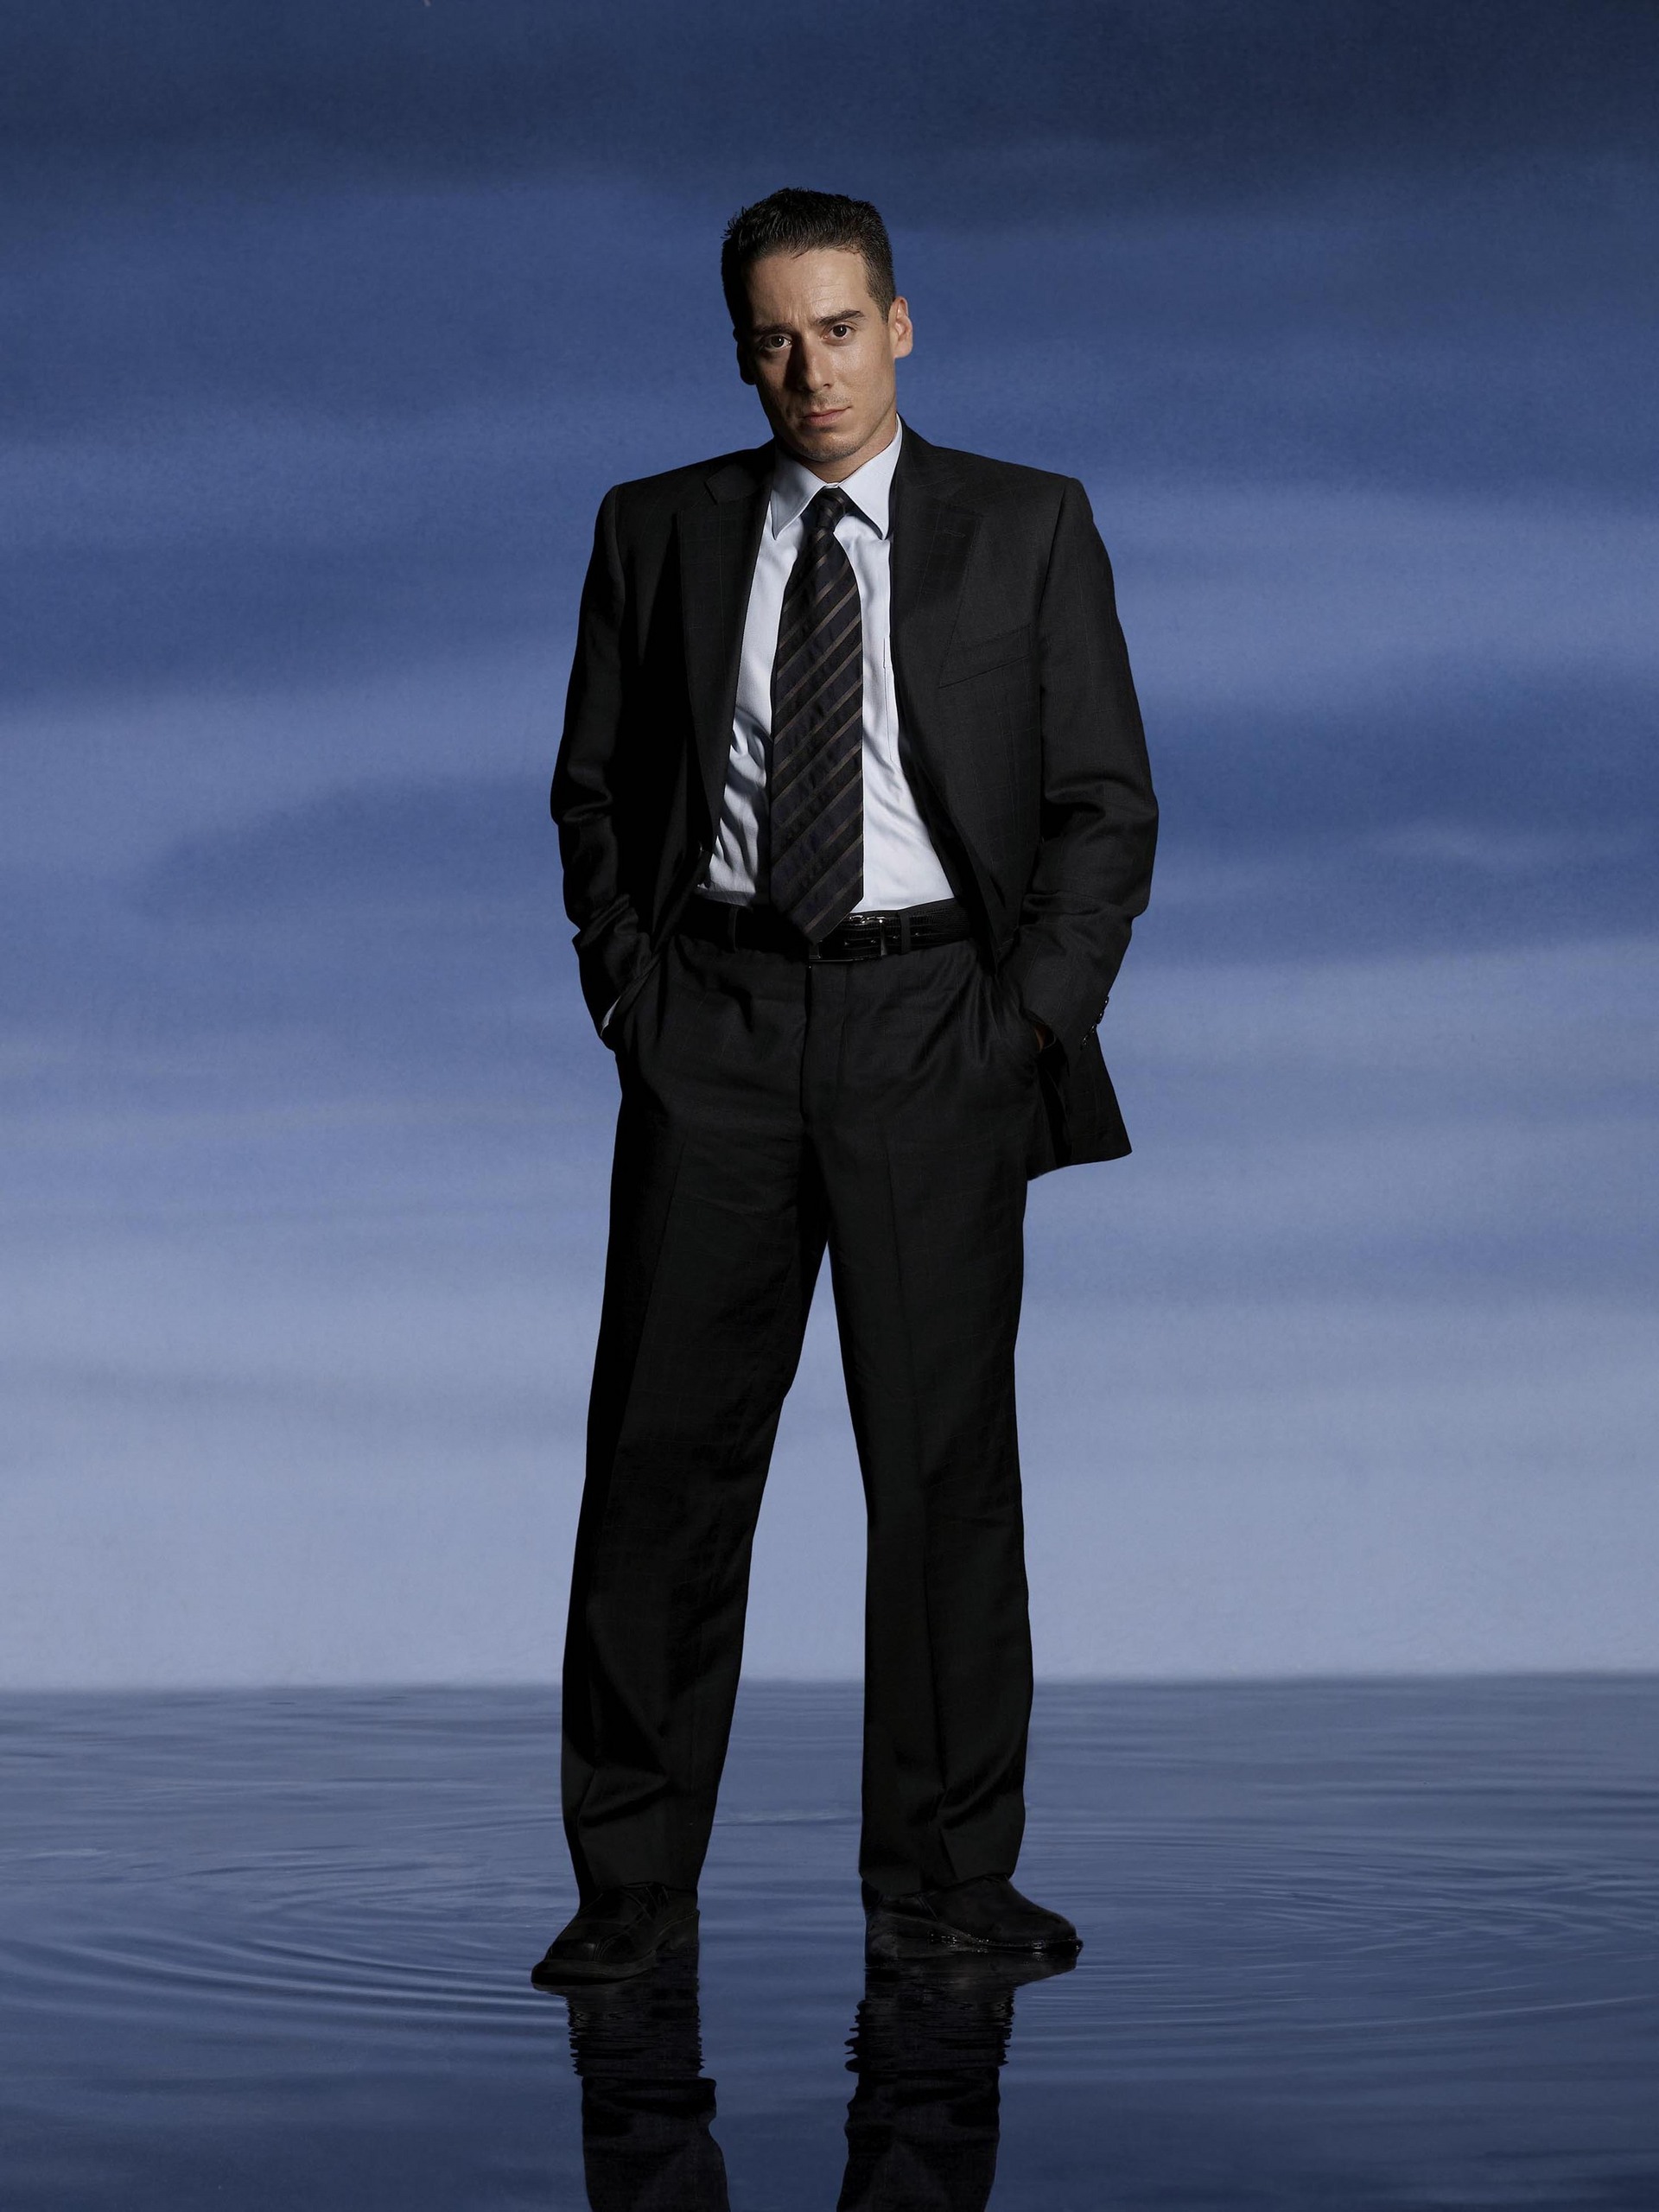  Kirk Acevedo as Agent Charlie Francis in a 'Fringe' Promotional Photoshoot